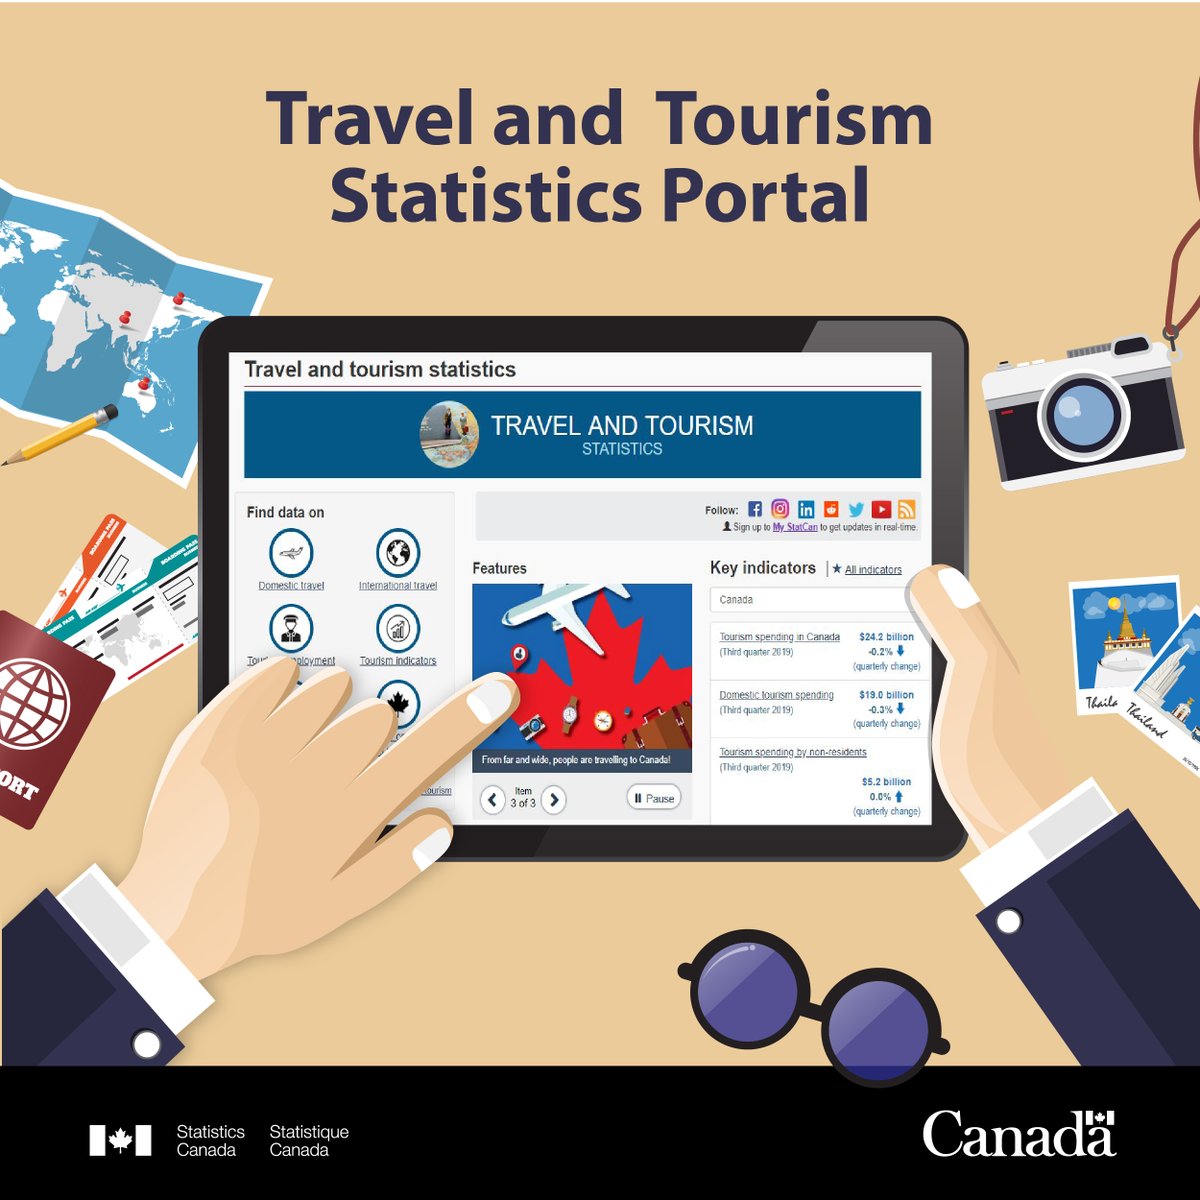 Want to learn more about the impact of the #COVID19 pandemic on the tourism sector in Canada? Check out our Travel and Tourism Stats portal: statcan.gc.ca/eng/subjects-s…. #TourismCounts #ExploreCanada